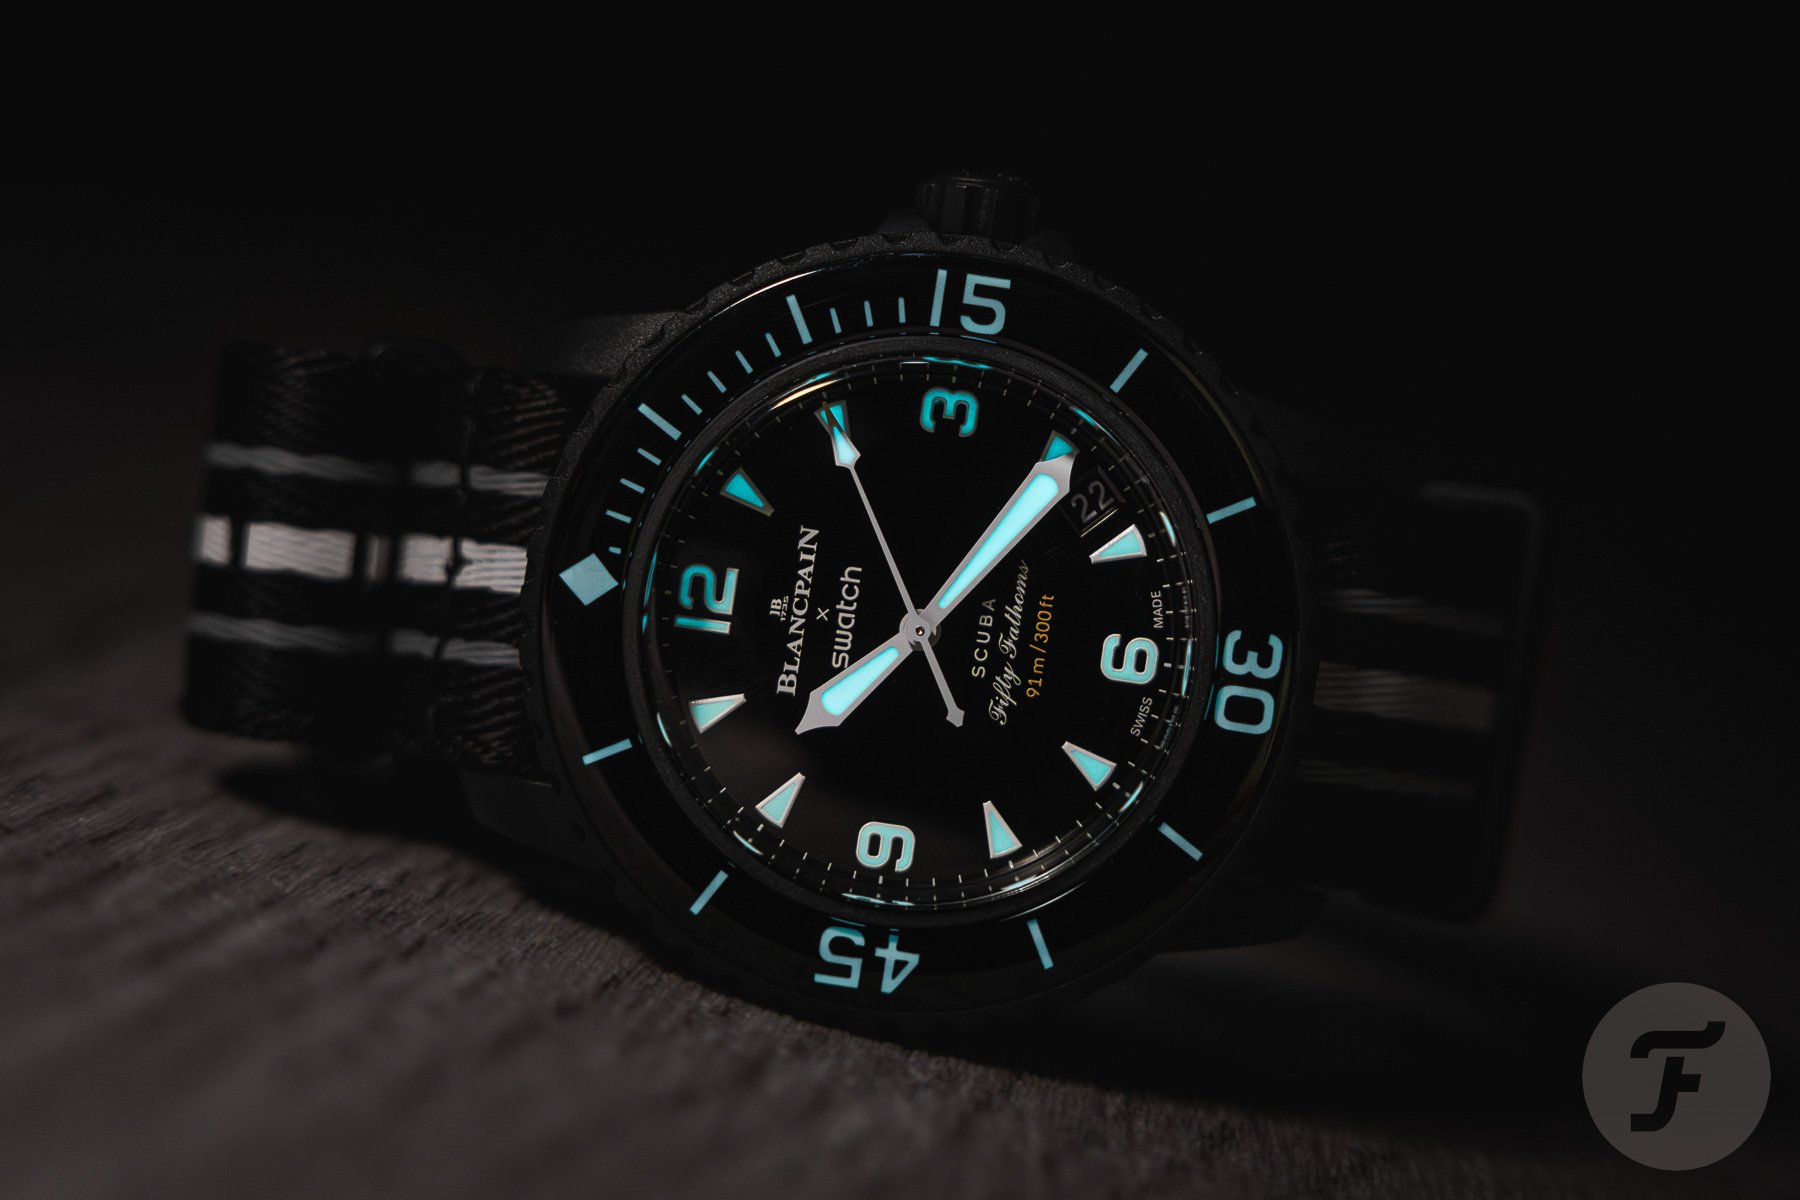 ocean - Blancpain X Swatch ? - Page 4 Blancpain-%C3%97-Swatch-Bioceramic-Scuba-Fifty-Fathoms-Ocean-Of-Storms-11